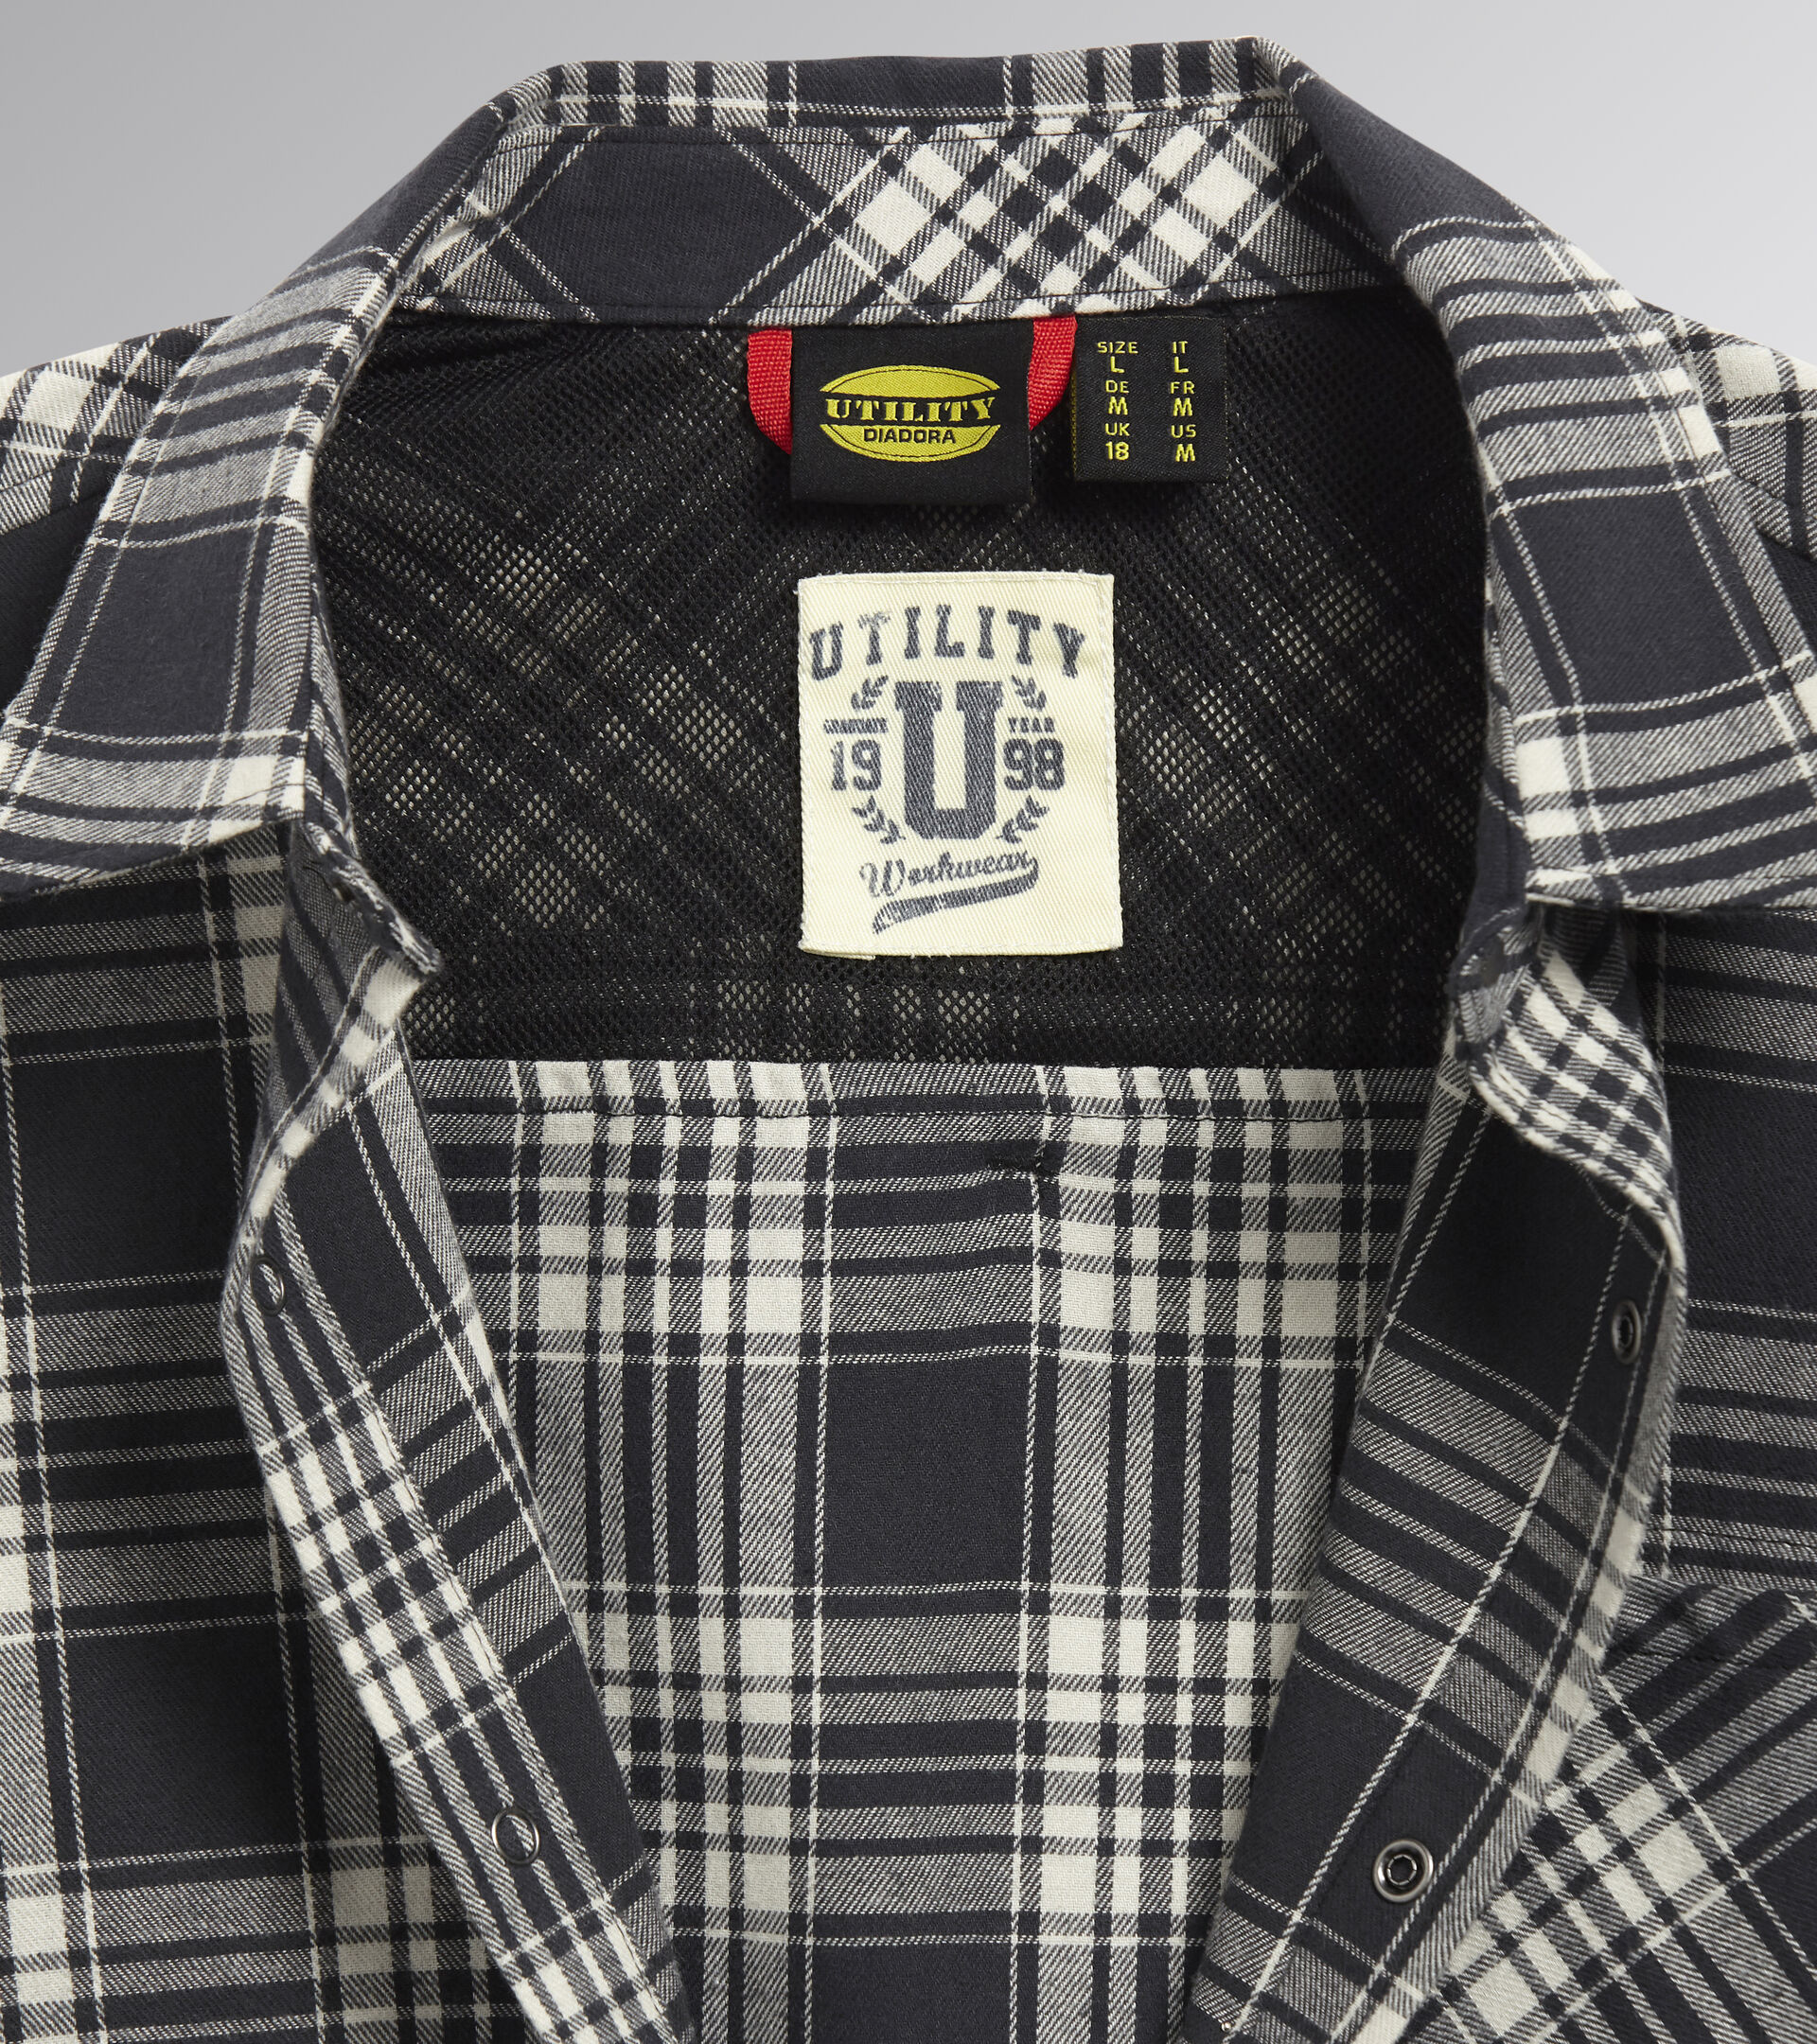 Work and safety shirt SHIRT CHECK BLACK/OFF WHITE - Utility